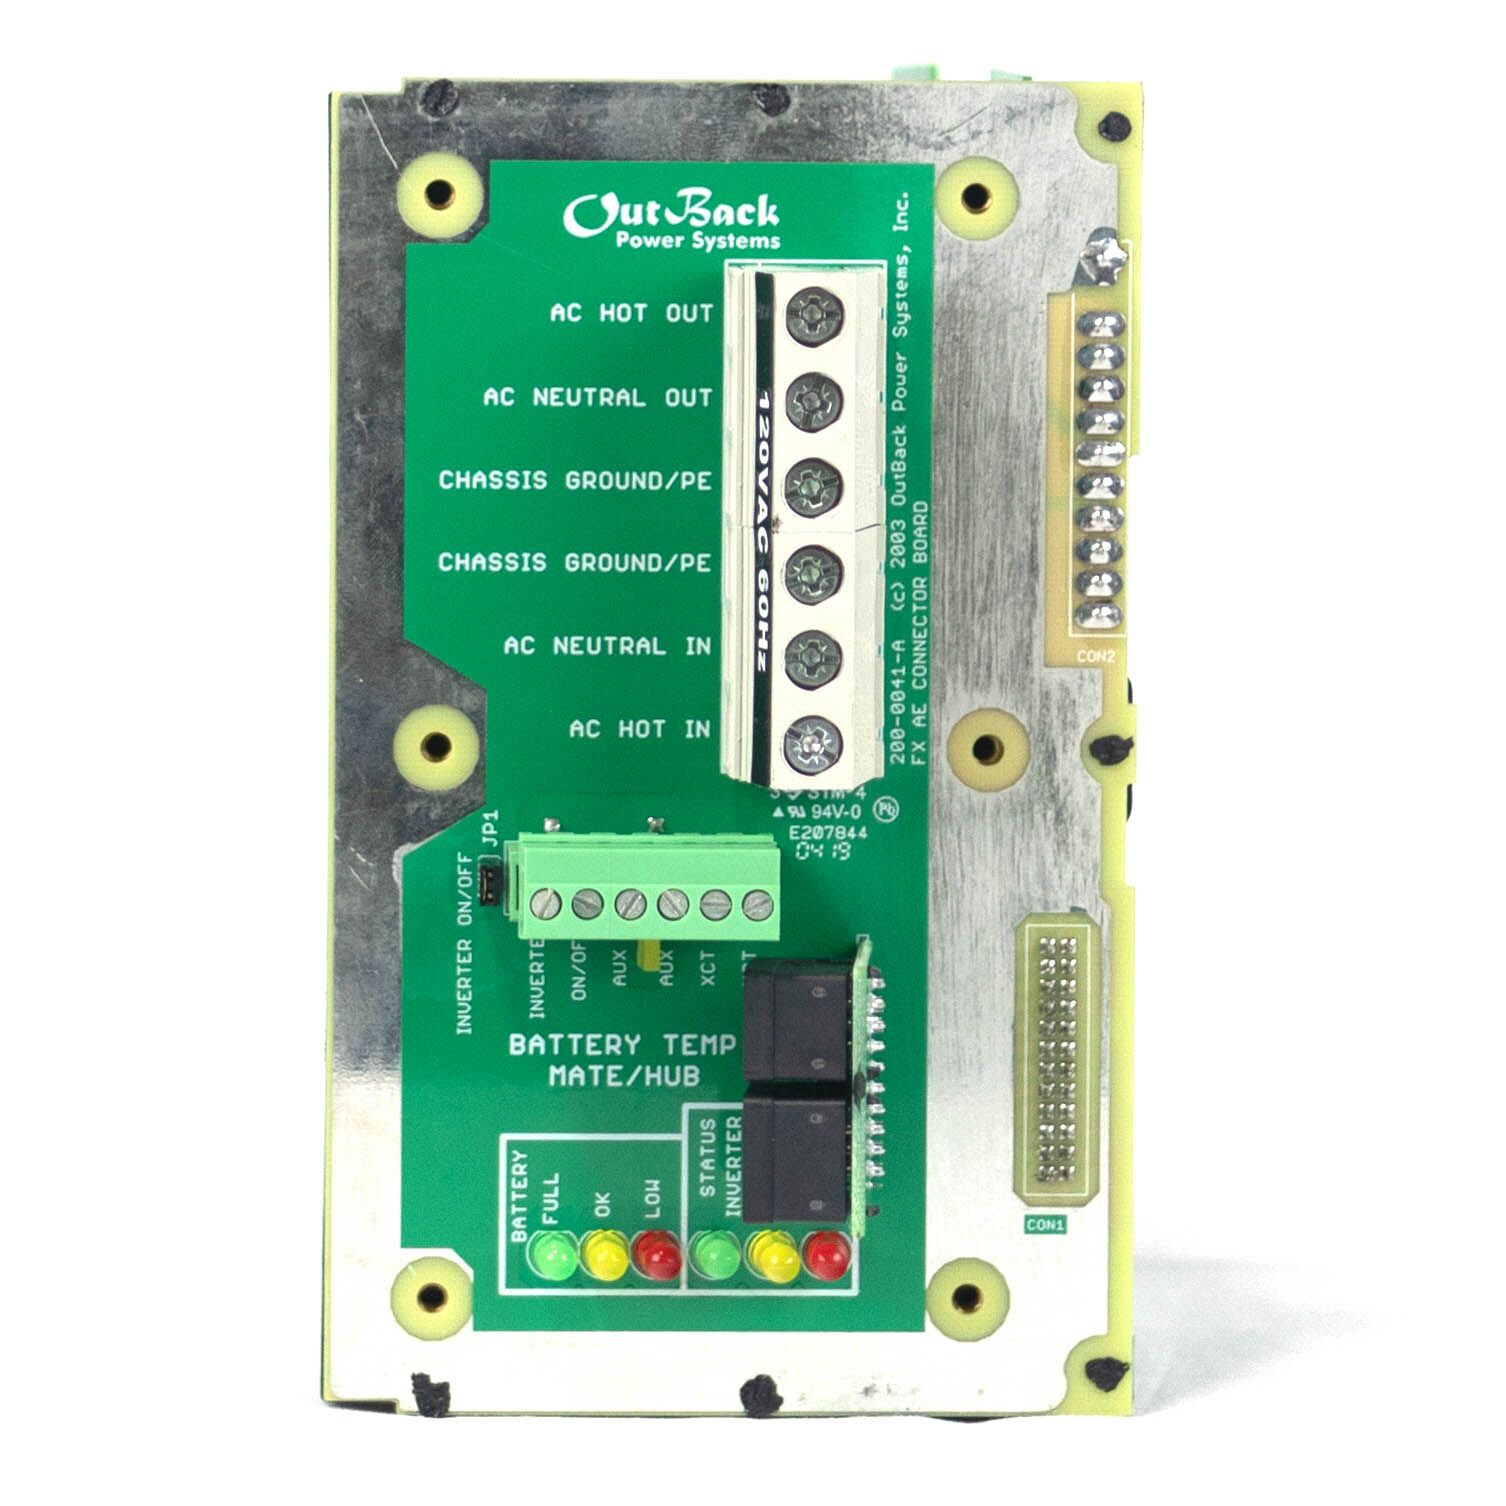 Outback Power 210 0015 1TEST AC Board